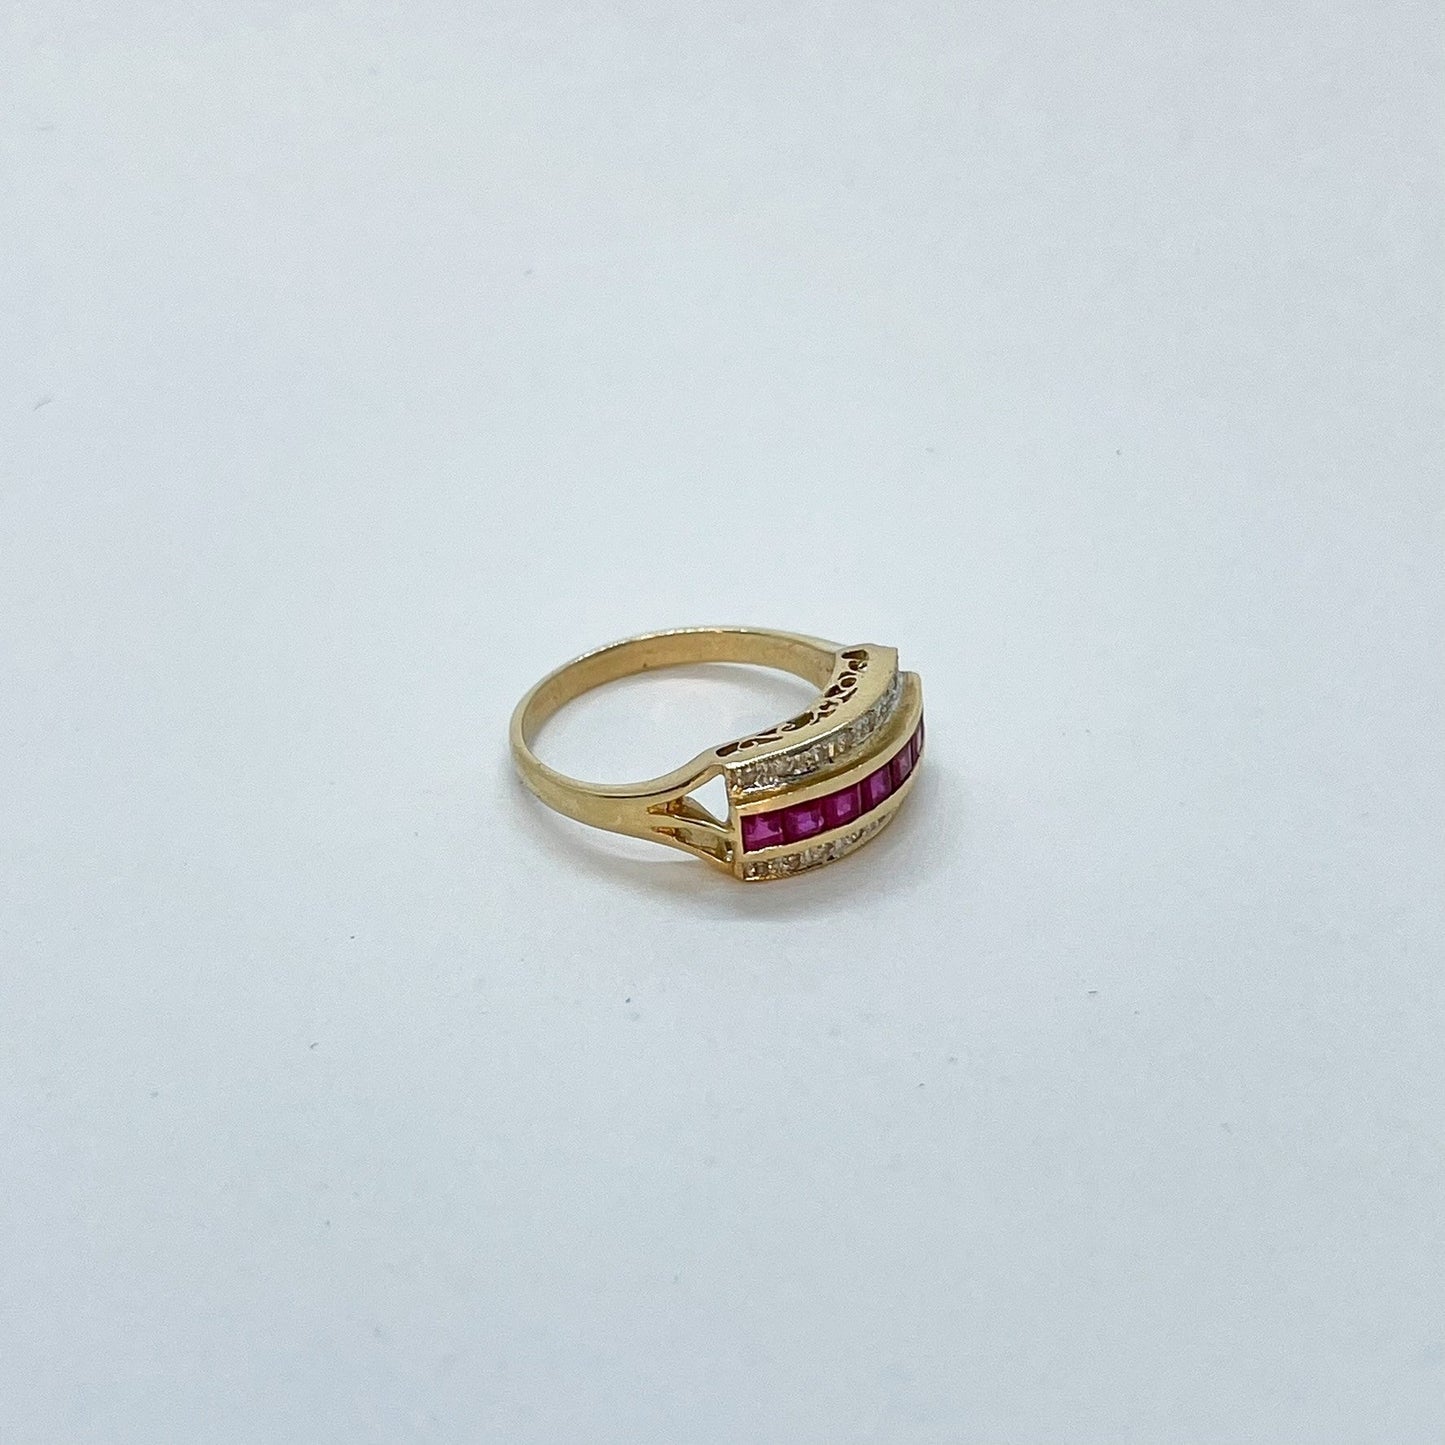 10K Channel Set Ruby Band Ring with Milgrain details